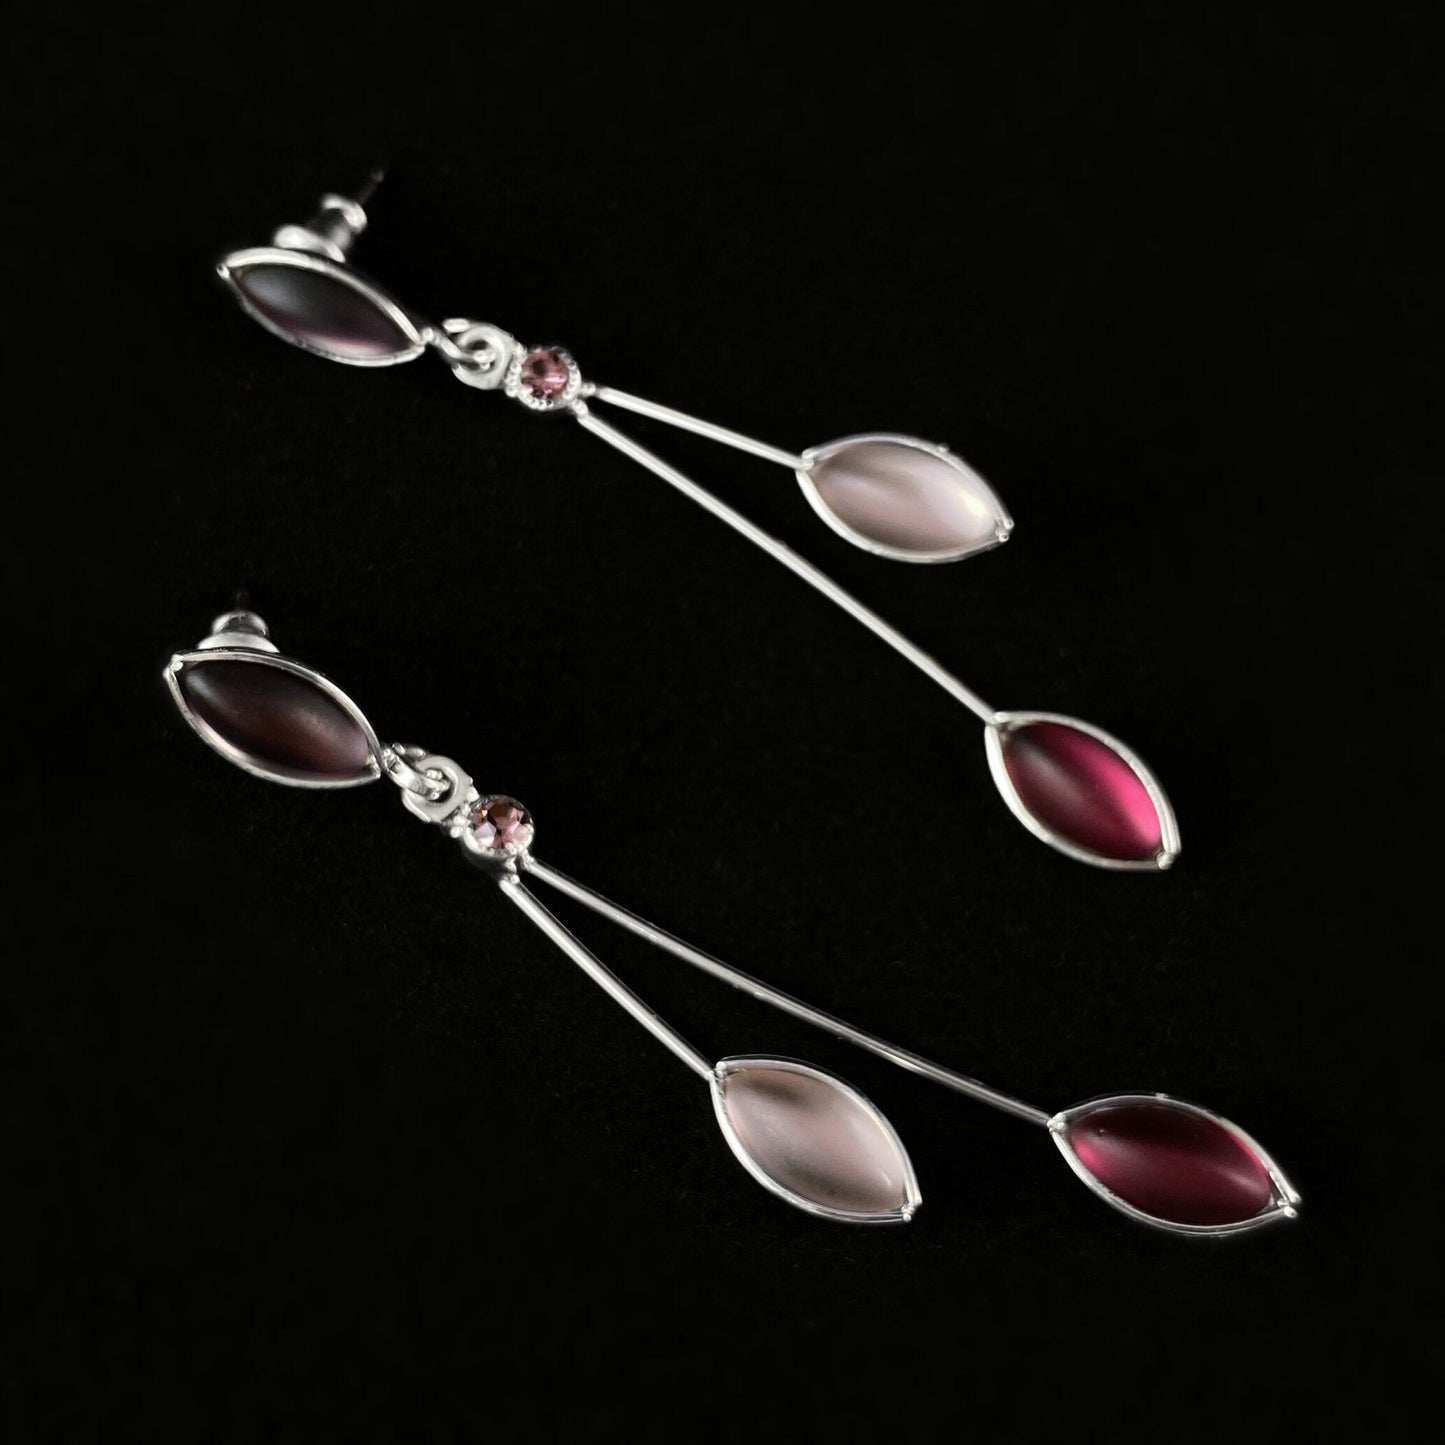 Floral Style Earrings with Silver Wire and Handmade Glass Beads, Hypoallergenic, Pink/Fuchsia/Amethyst - Kristina